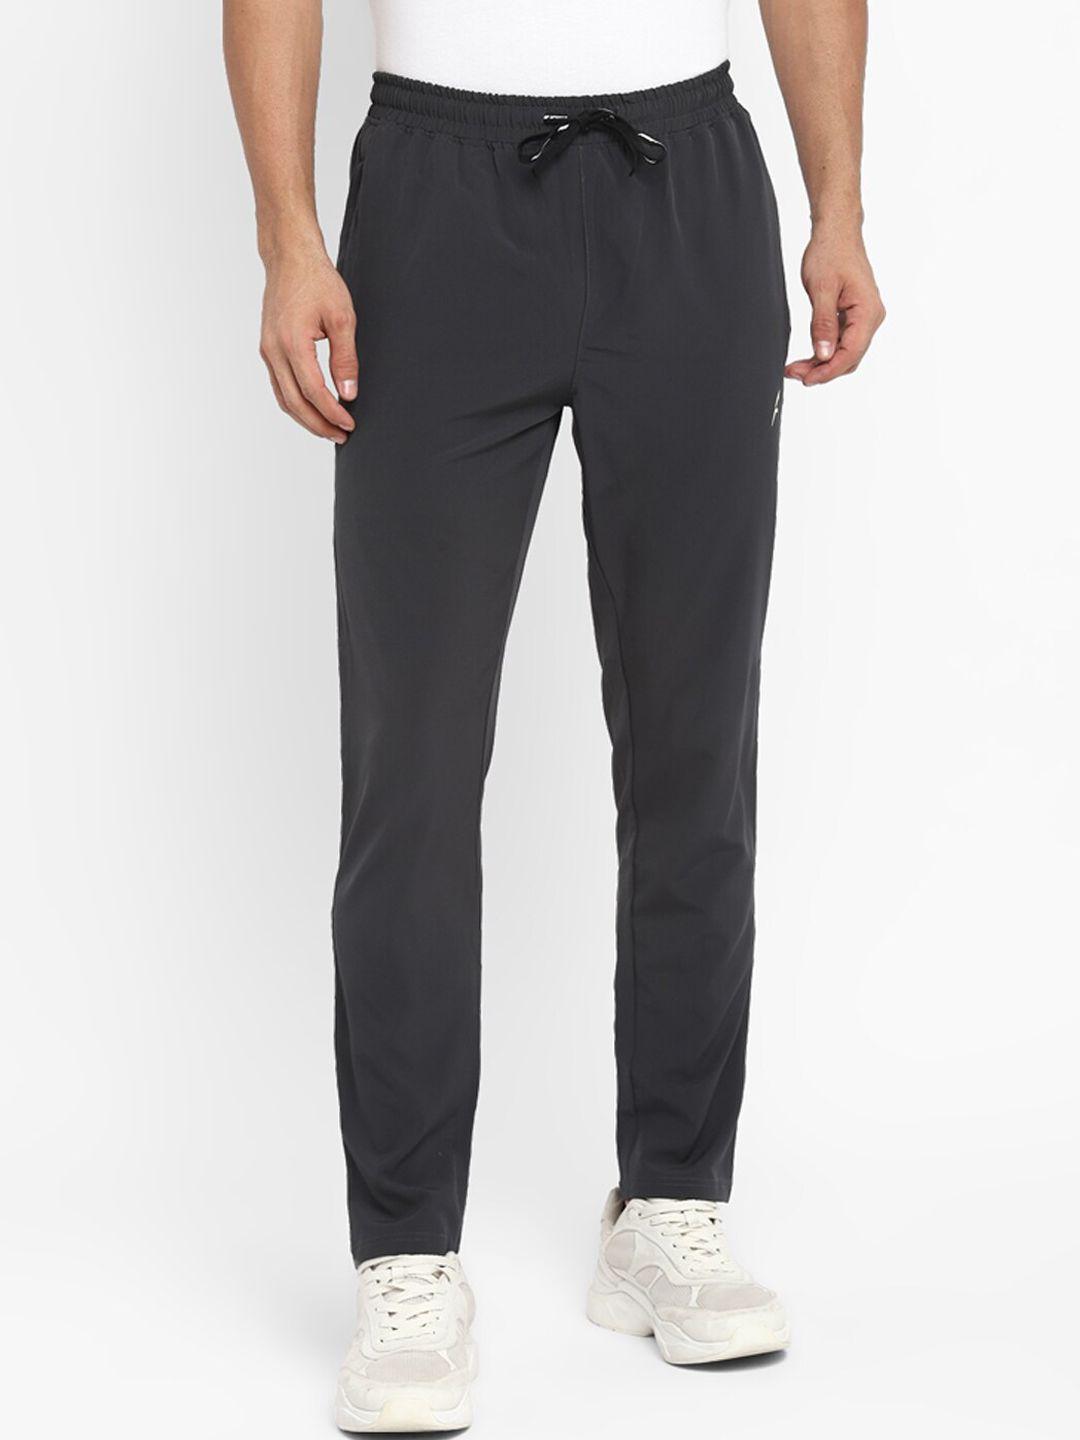 furo-by-red-chief-men-grey-solid-cotton-track-pants